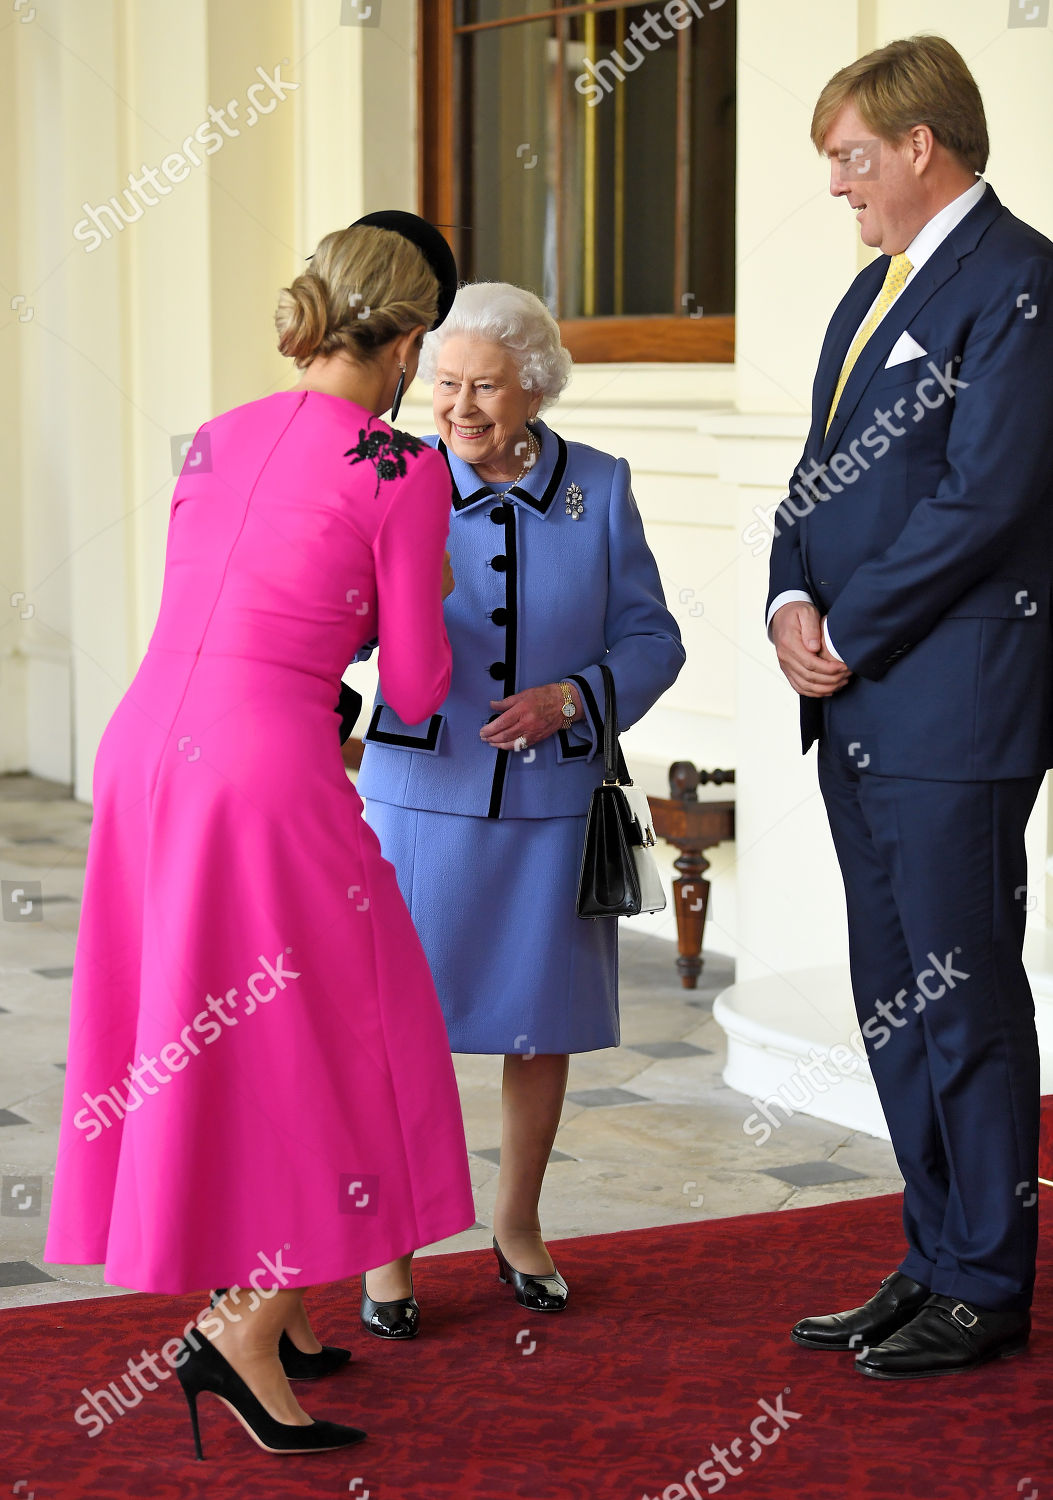 state-visit-of-the-king-and-queen-of-the-netherlands-london-uk-shutterstock-editorial-9943186aa.jpg